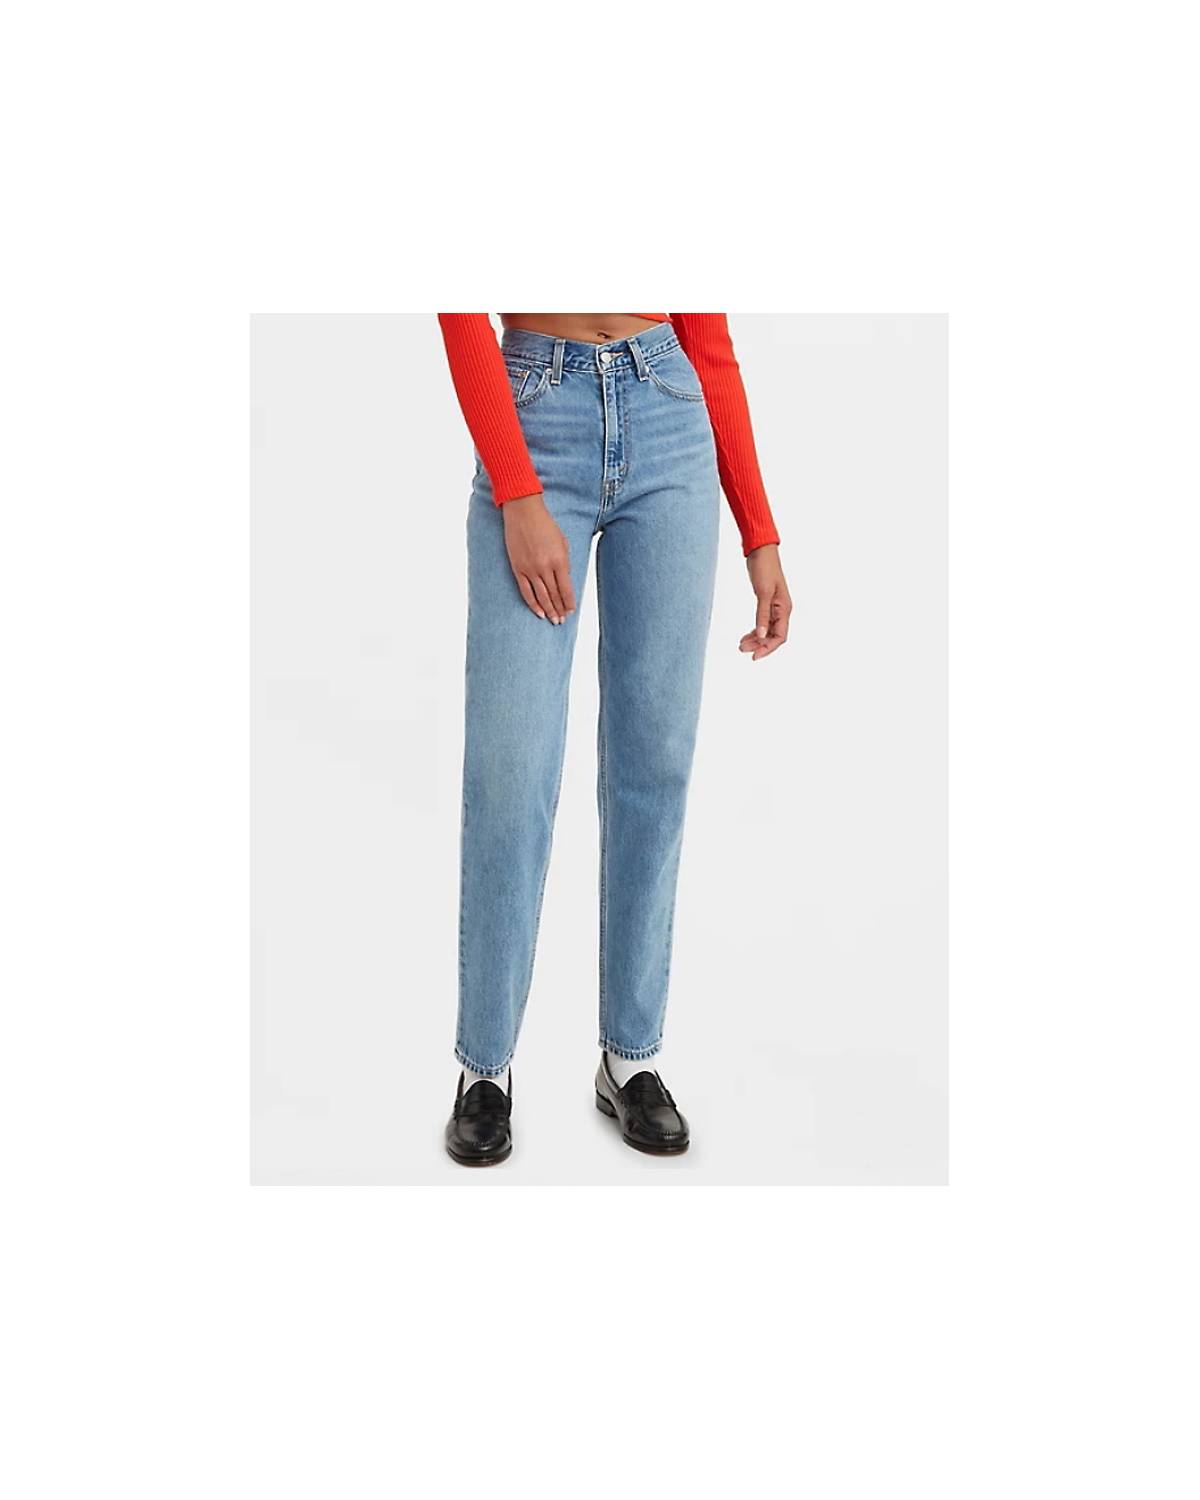 Women's High Rise Jeans